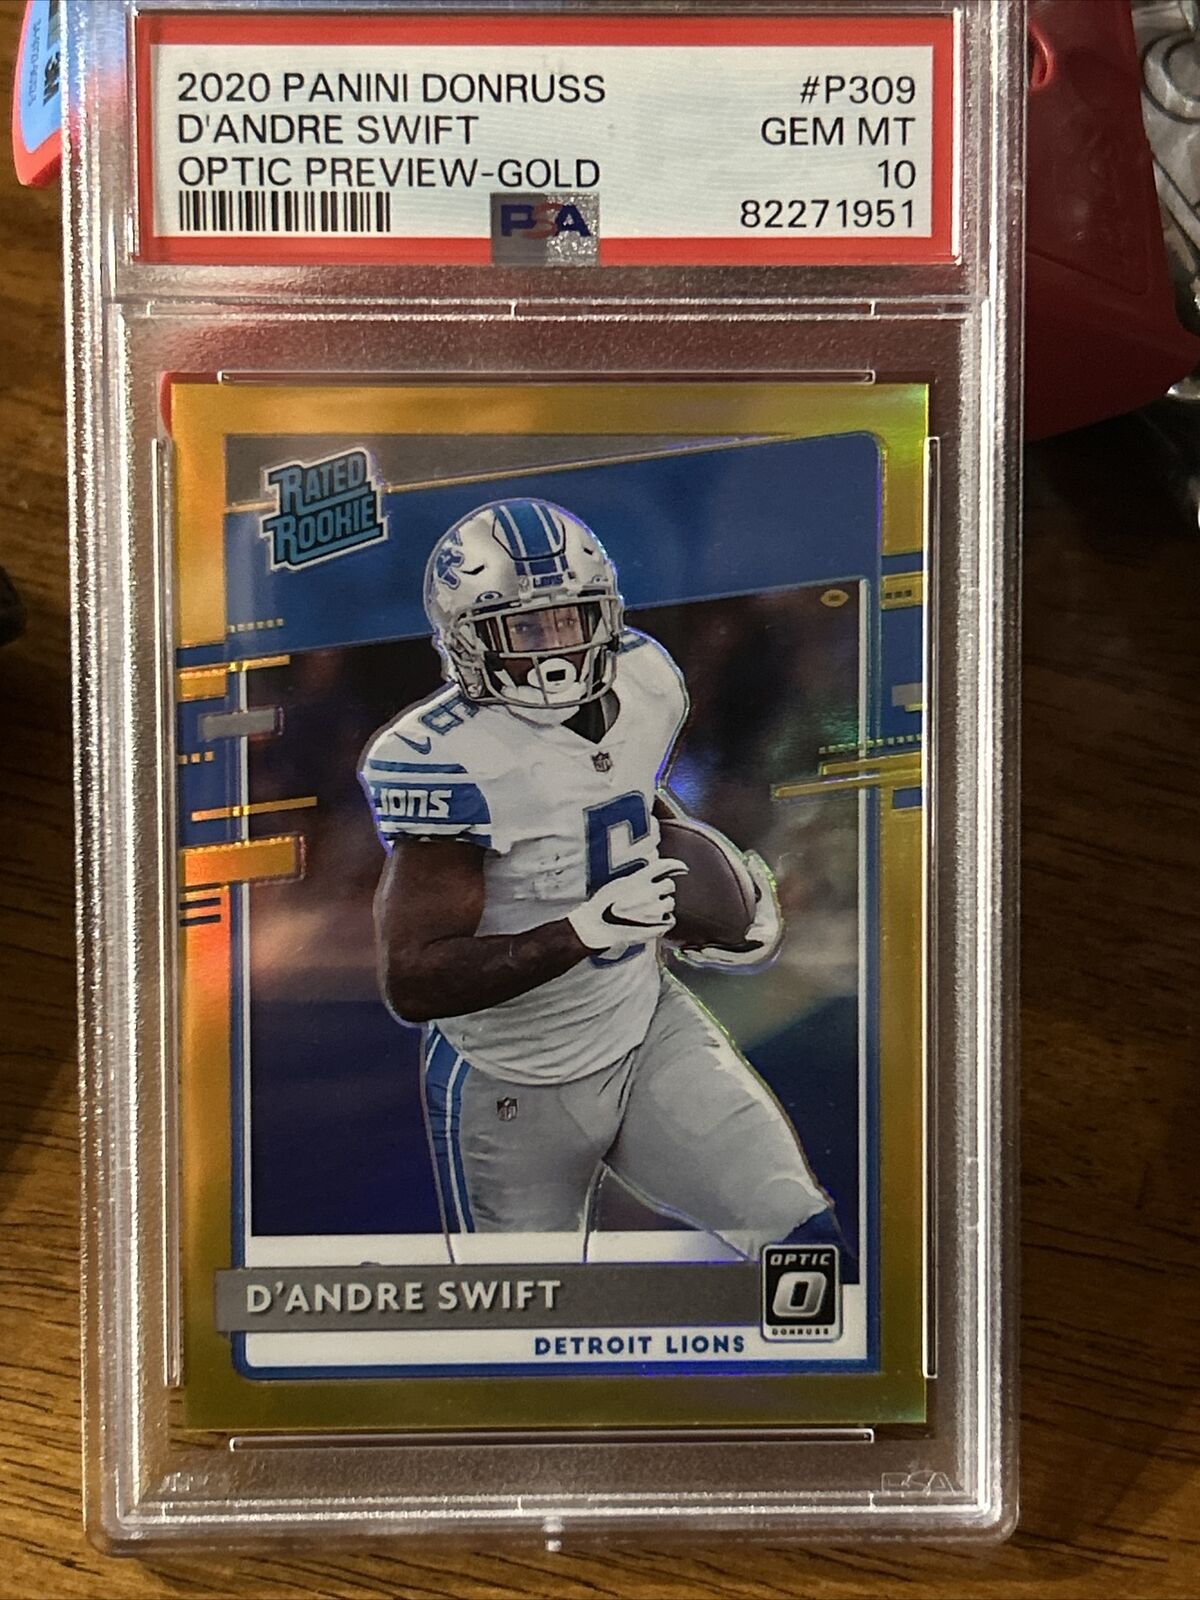 2020 Donruss Optic Preview D'ANDRE SWIFT Rated Rookie Gold /10 RC PSA 10